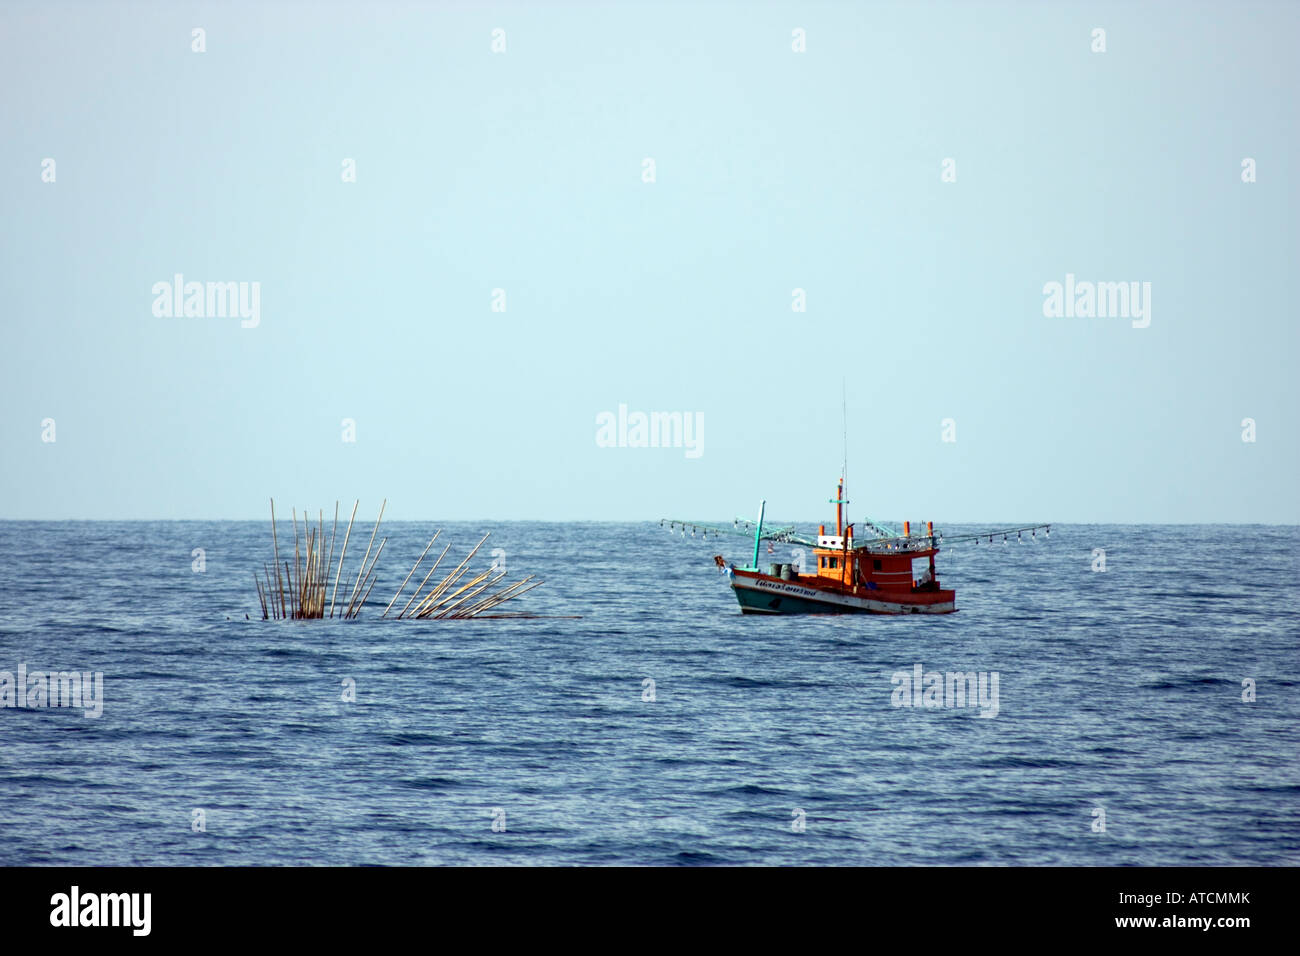 Floating bamboo bouy to mark fish traps in the Andaman sea, Thailand. A fishing vessel is moored near the trap. February 5, 20 Stock Photo